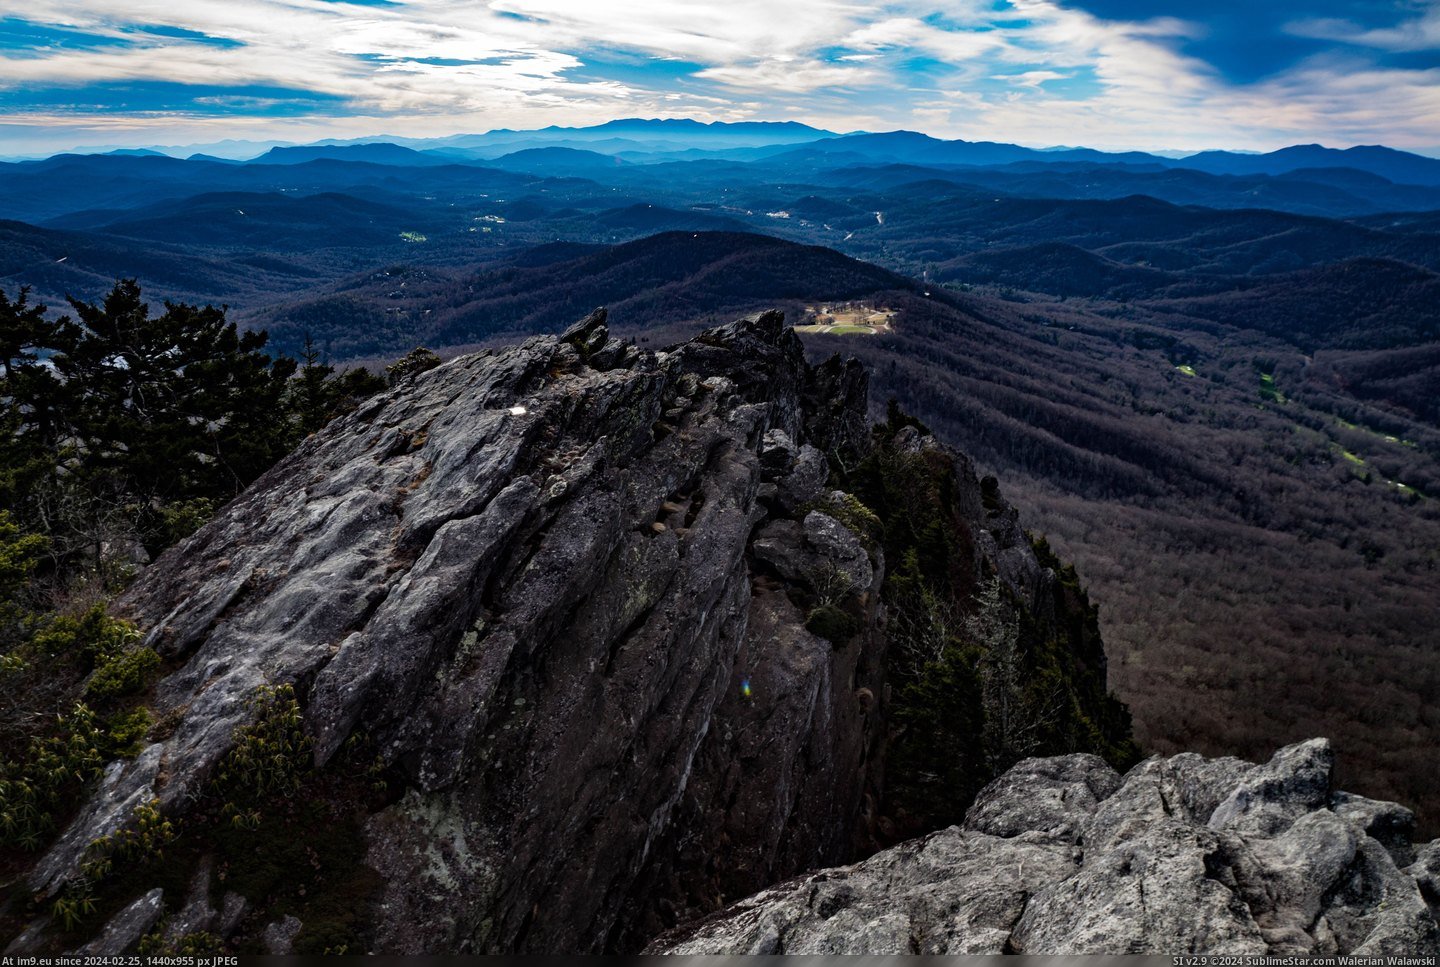 #Black #Mitchell #Usa #Grandfather #Peak #Mountains #Mountain [Earthporn] Linville Peak, Grandfather Mountain, NC, USA: looking towards Mt. Mitchell and the Black Mountains[5456x3642] Pic. (Изображение из альбом My r/EARTHPORN favs))